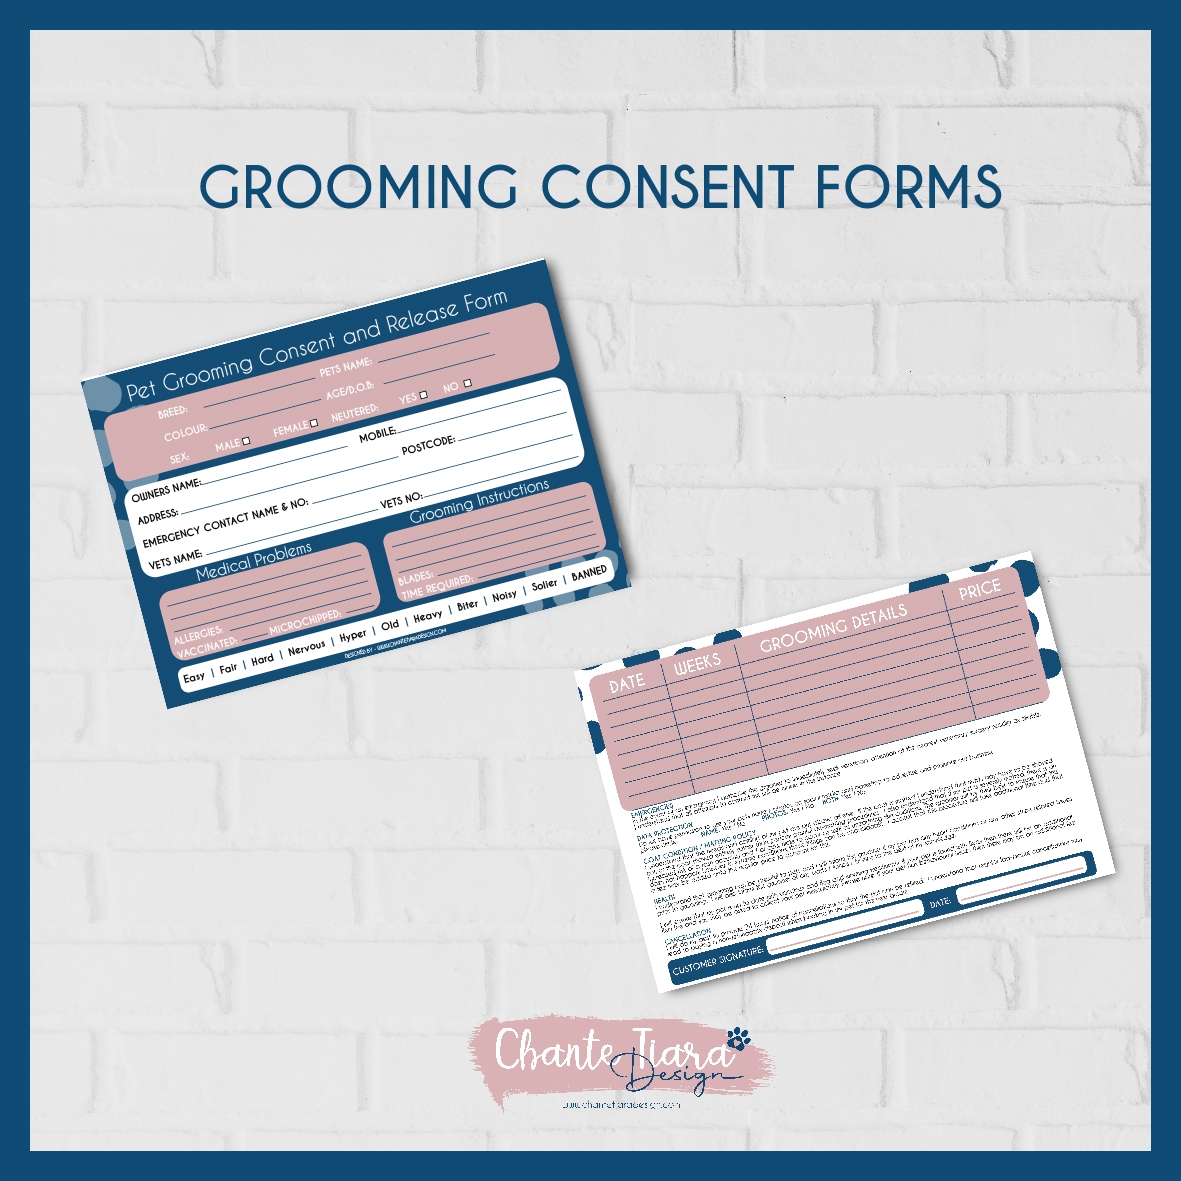 GROOMING CONSENT FORM